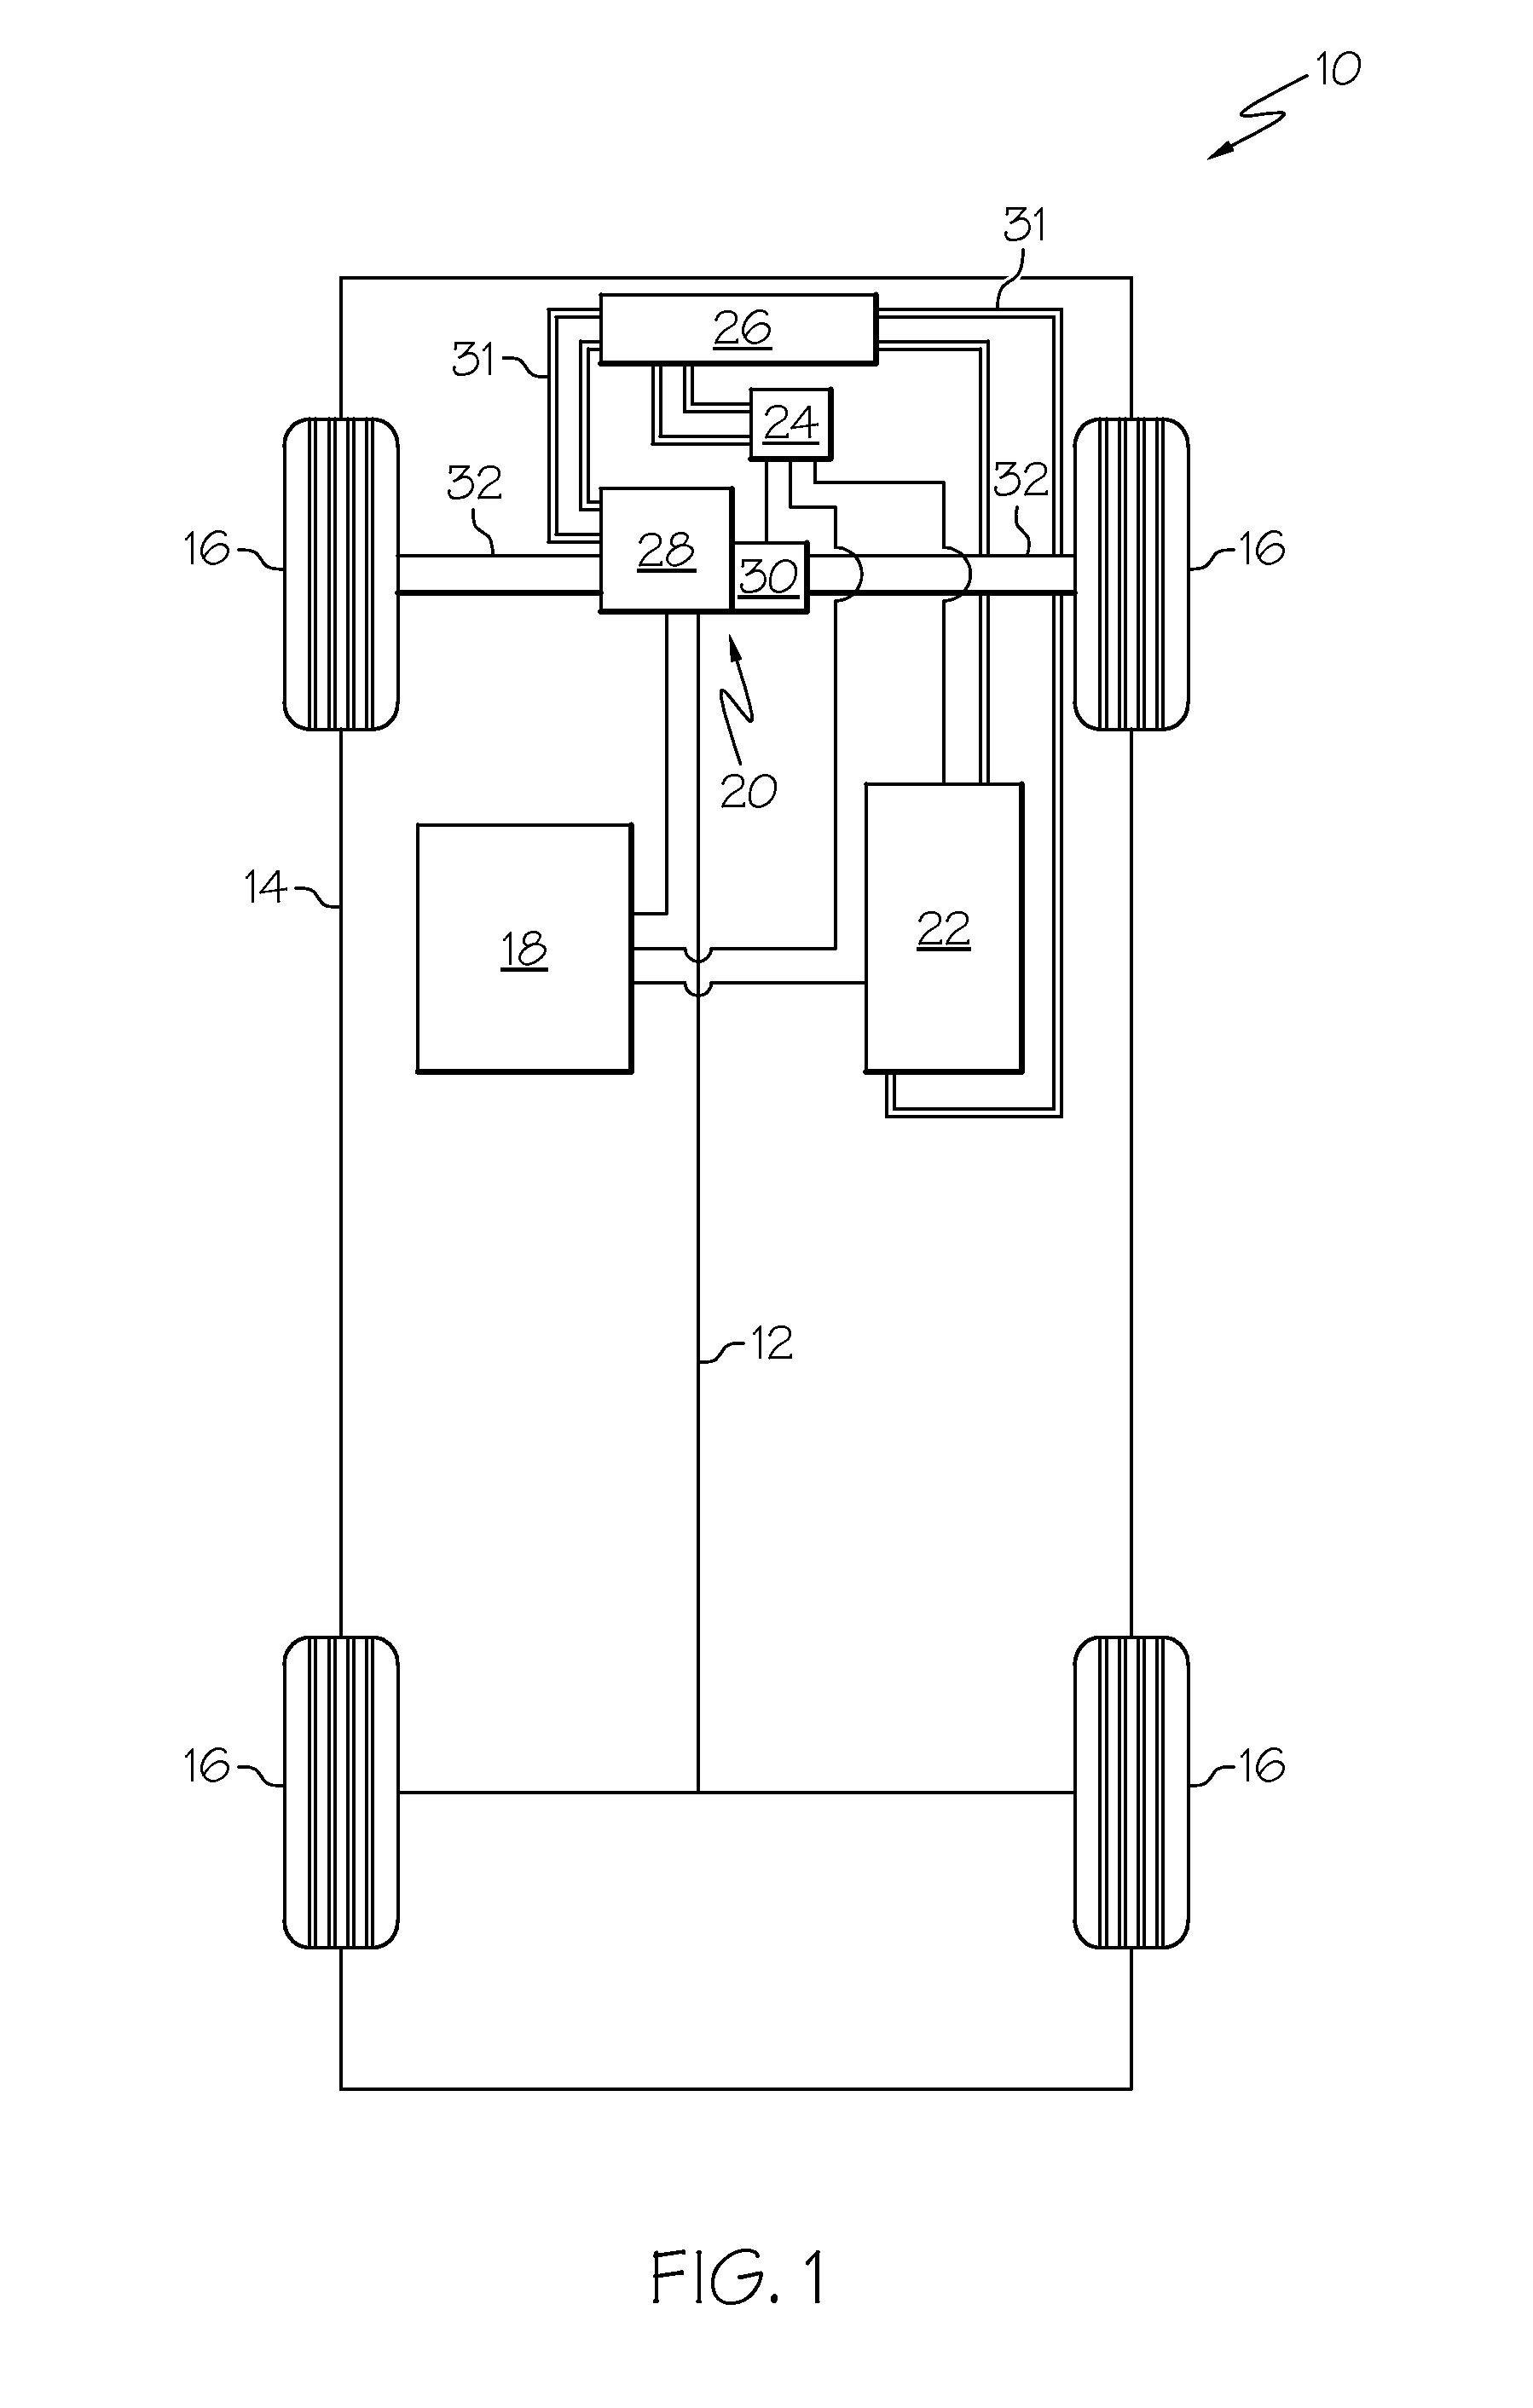 Battery assembly with immersed cell temperature regulating